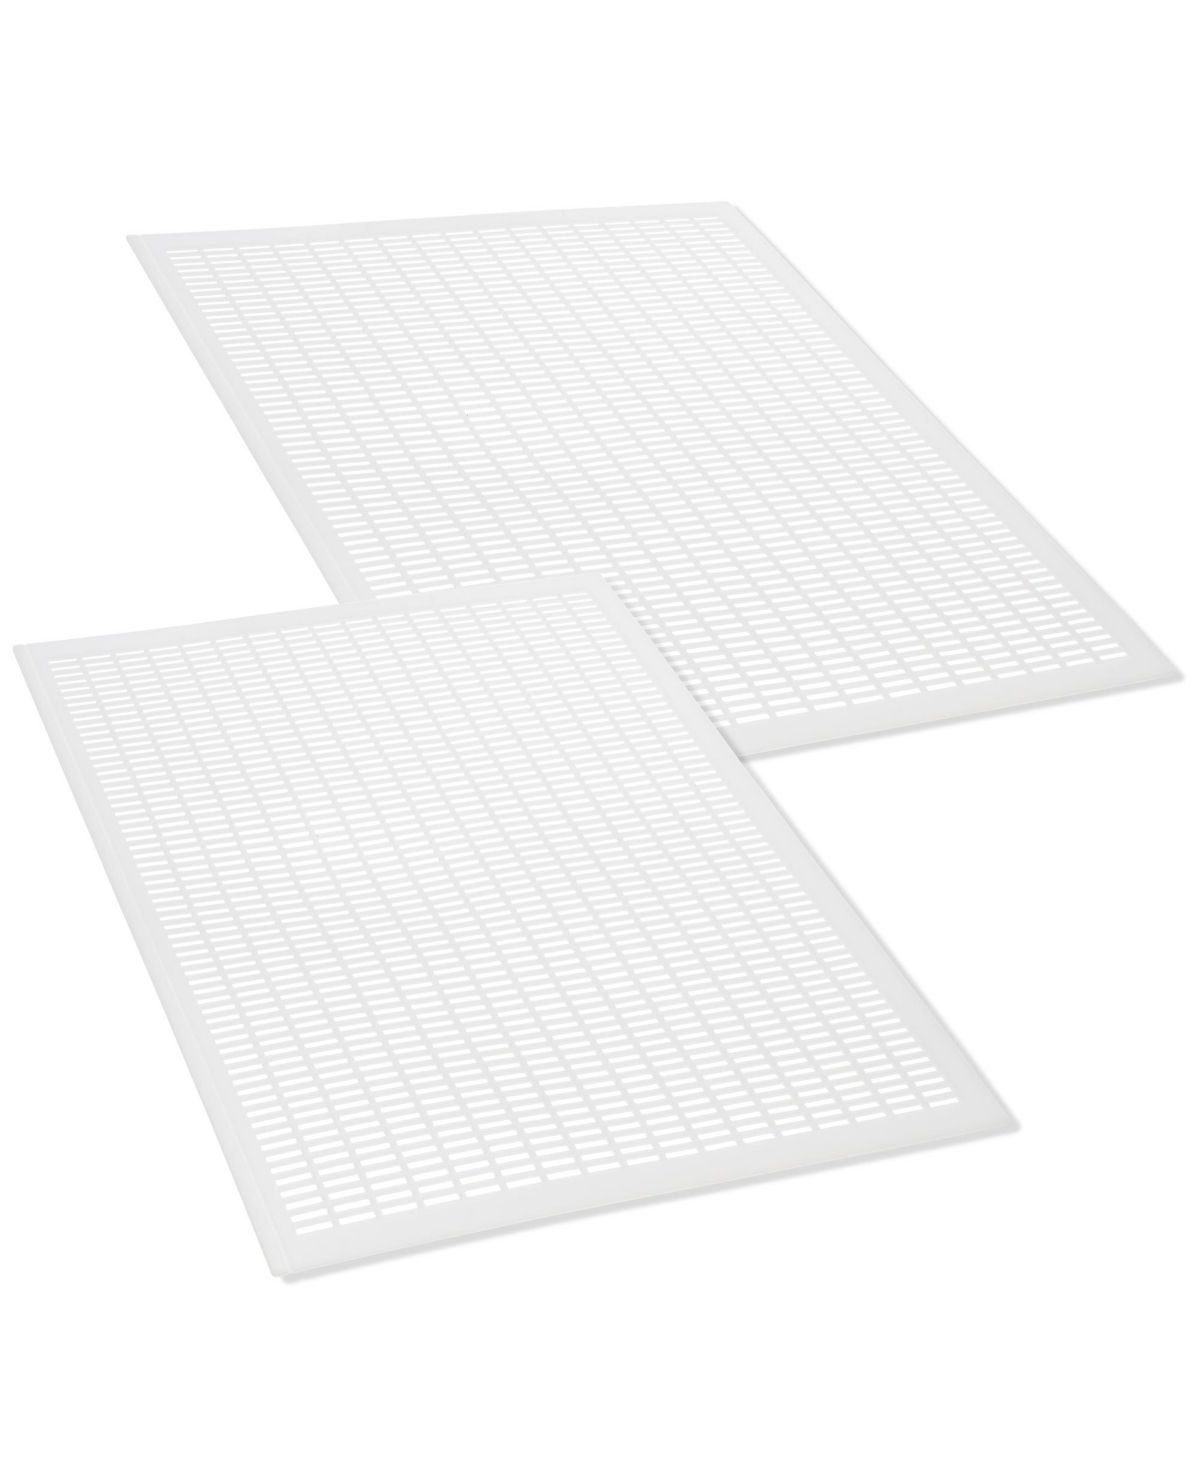 10 Frame Plastic Queen Excluder, 2 Pack - Bee Hive Tool for Beekeeping - White